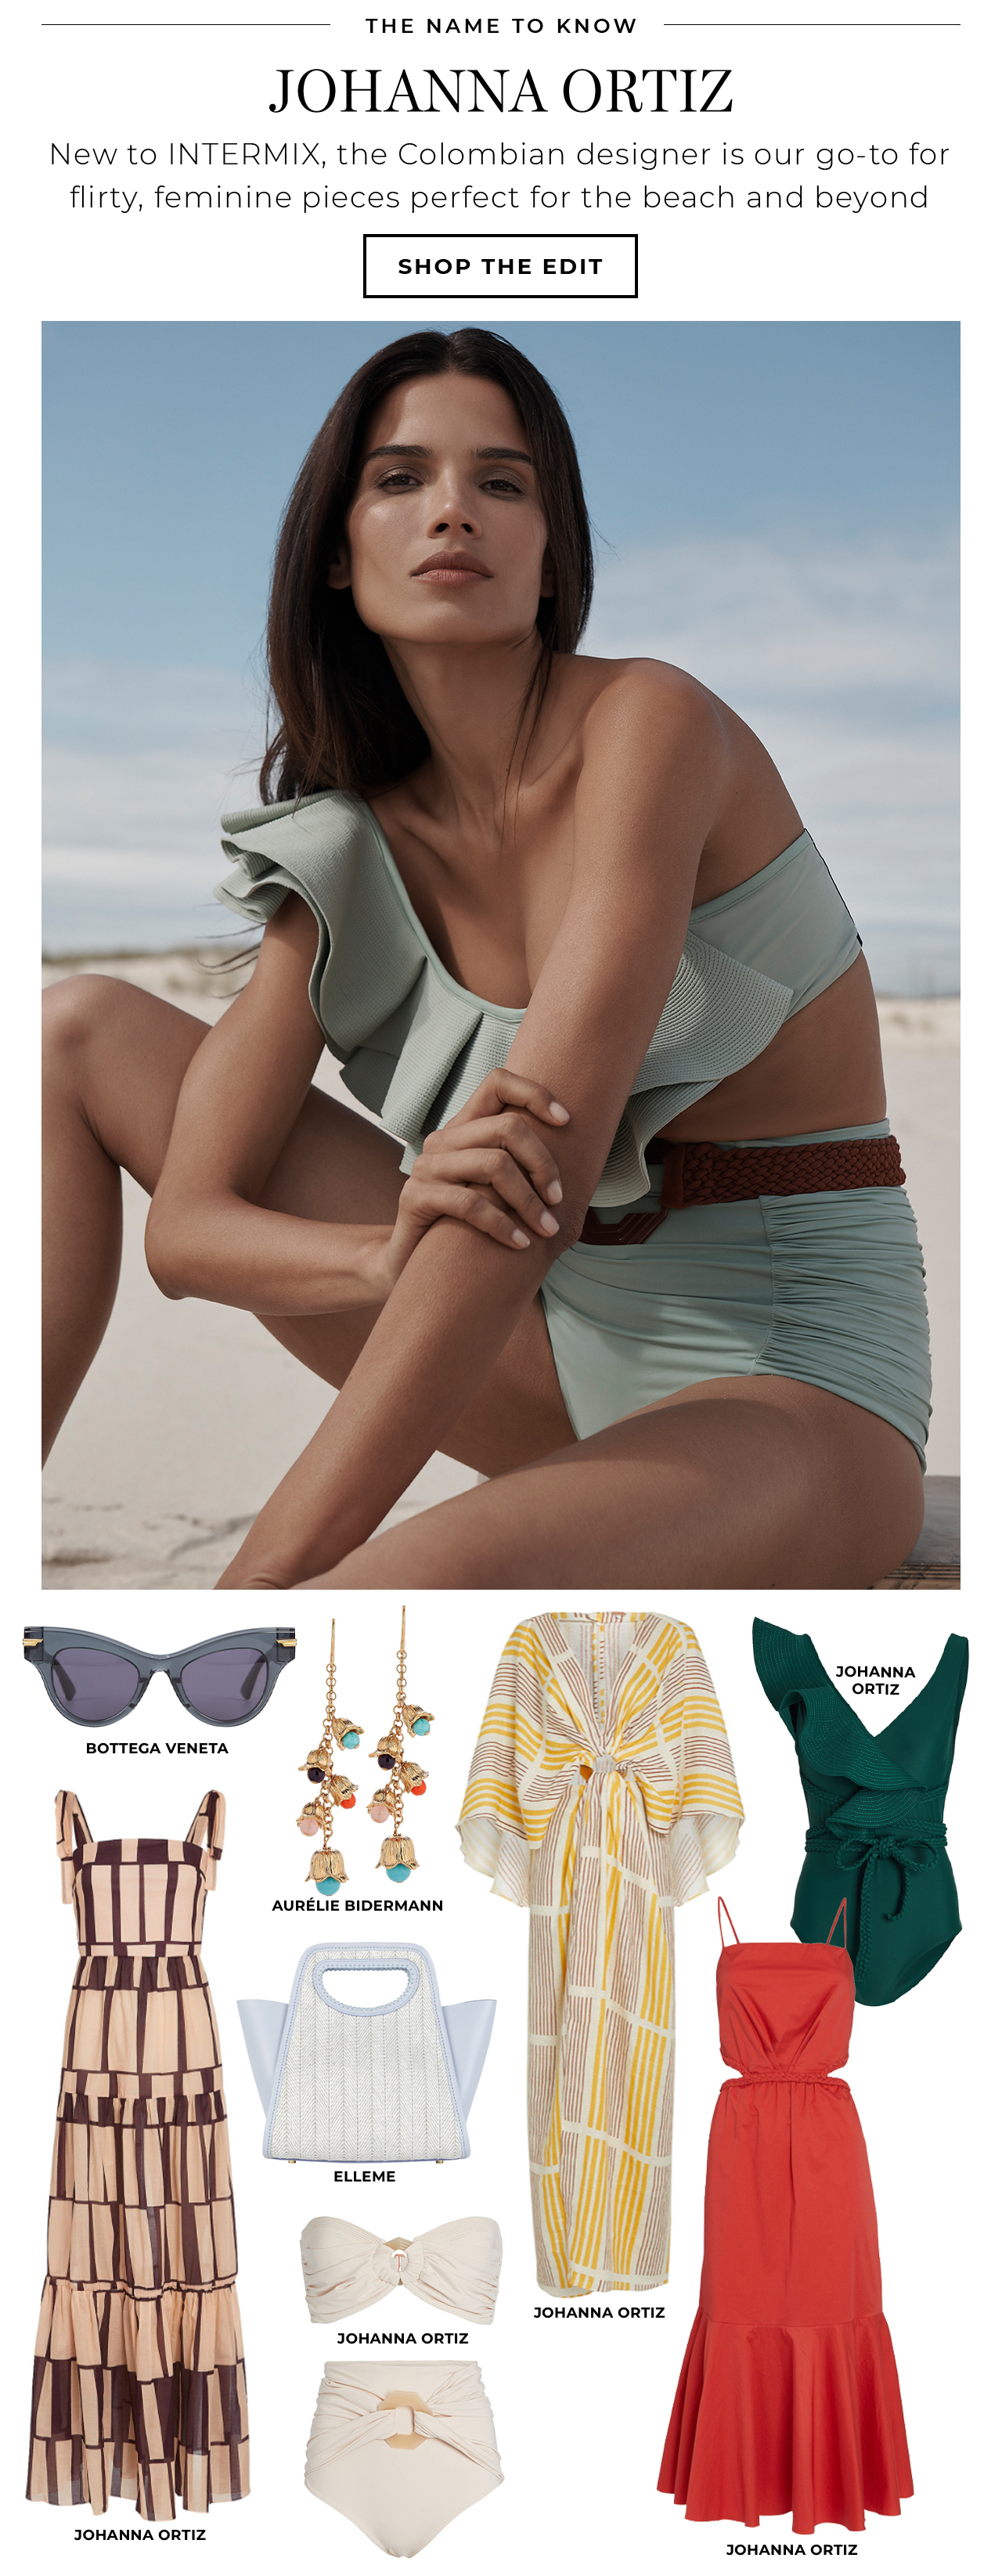 New to INTERMIX, Johanna Ortiz is our go-to for flirty, feminine pieces for the beach and beyond